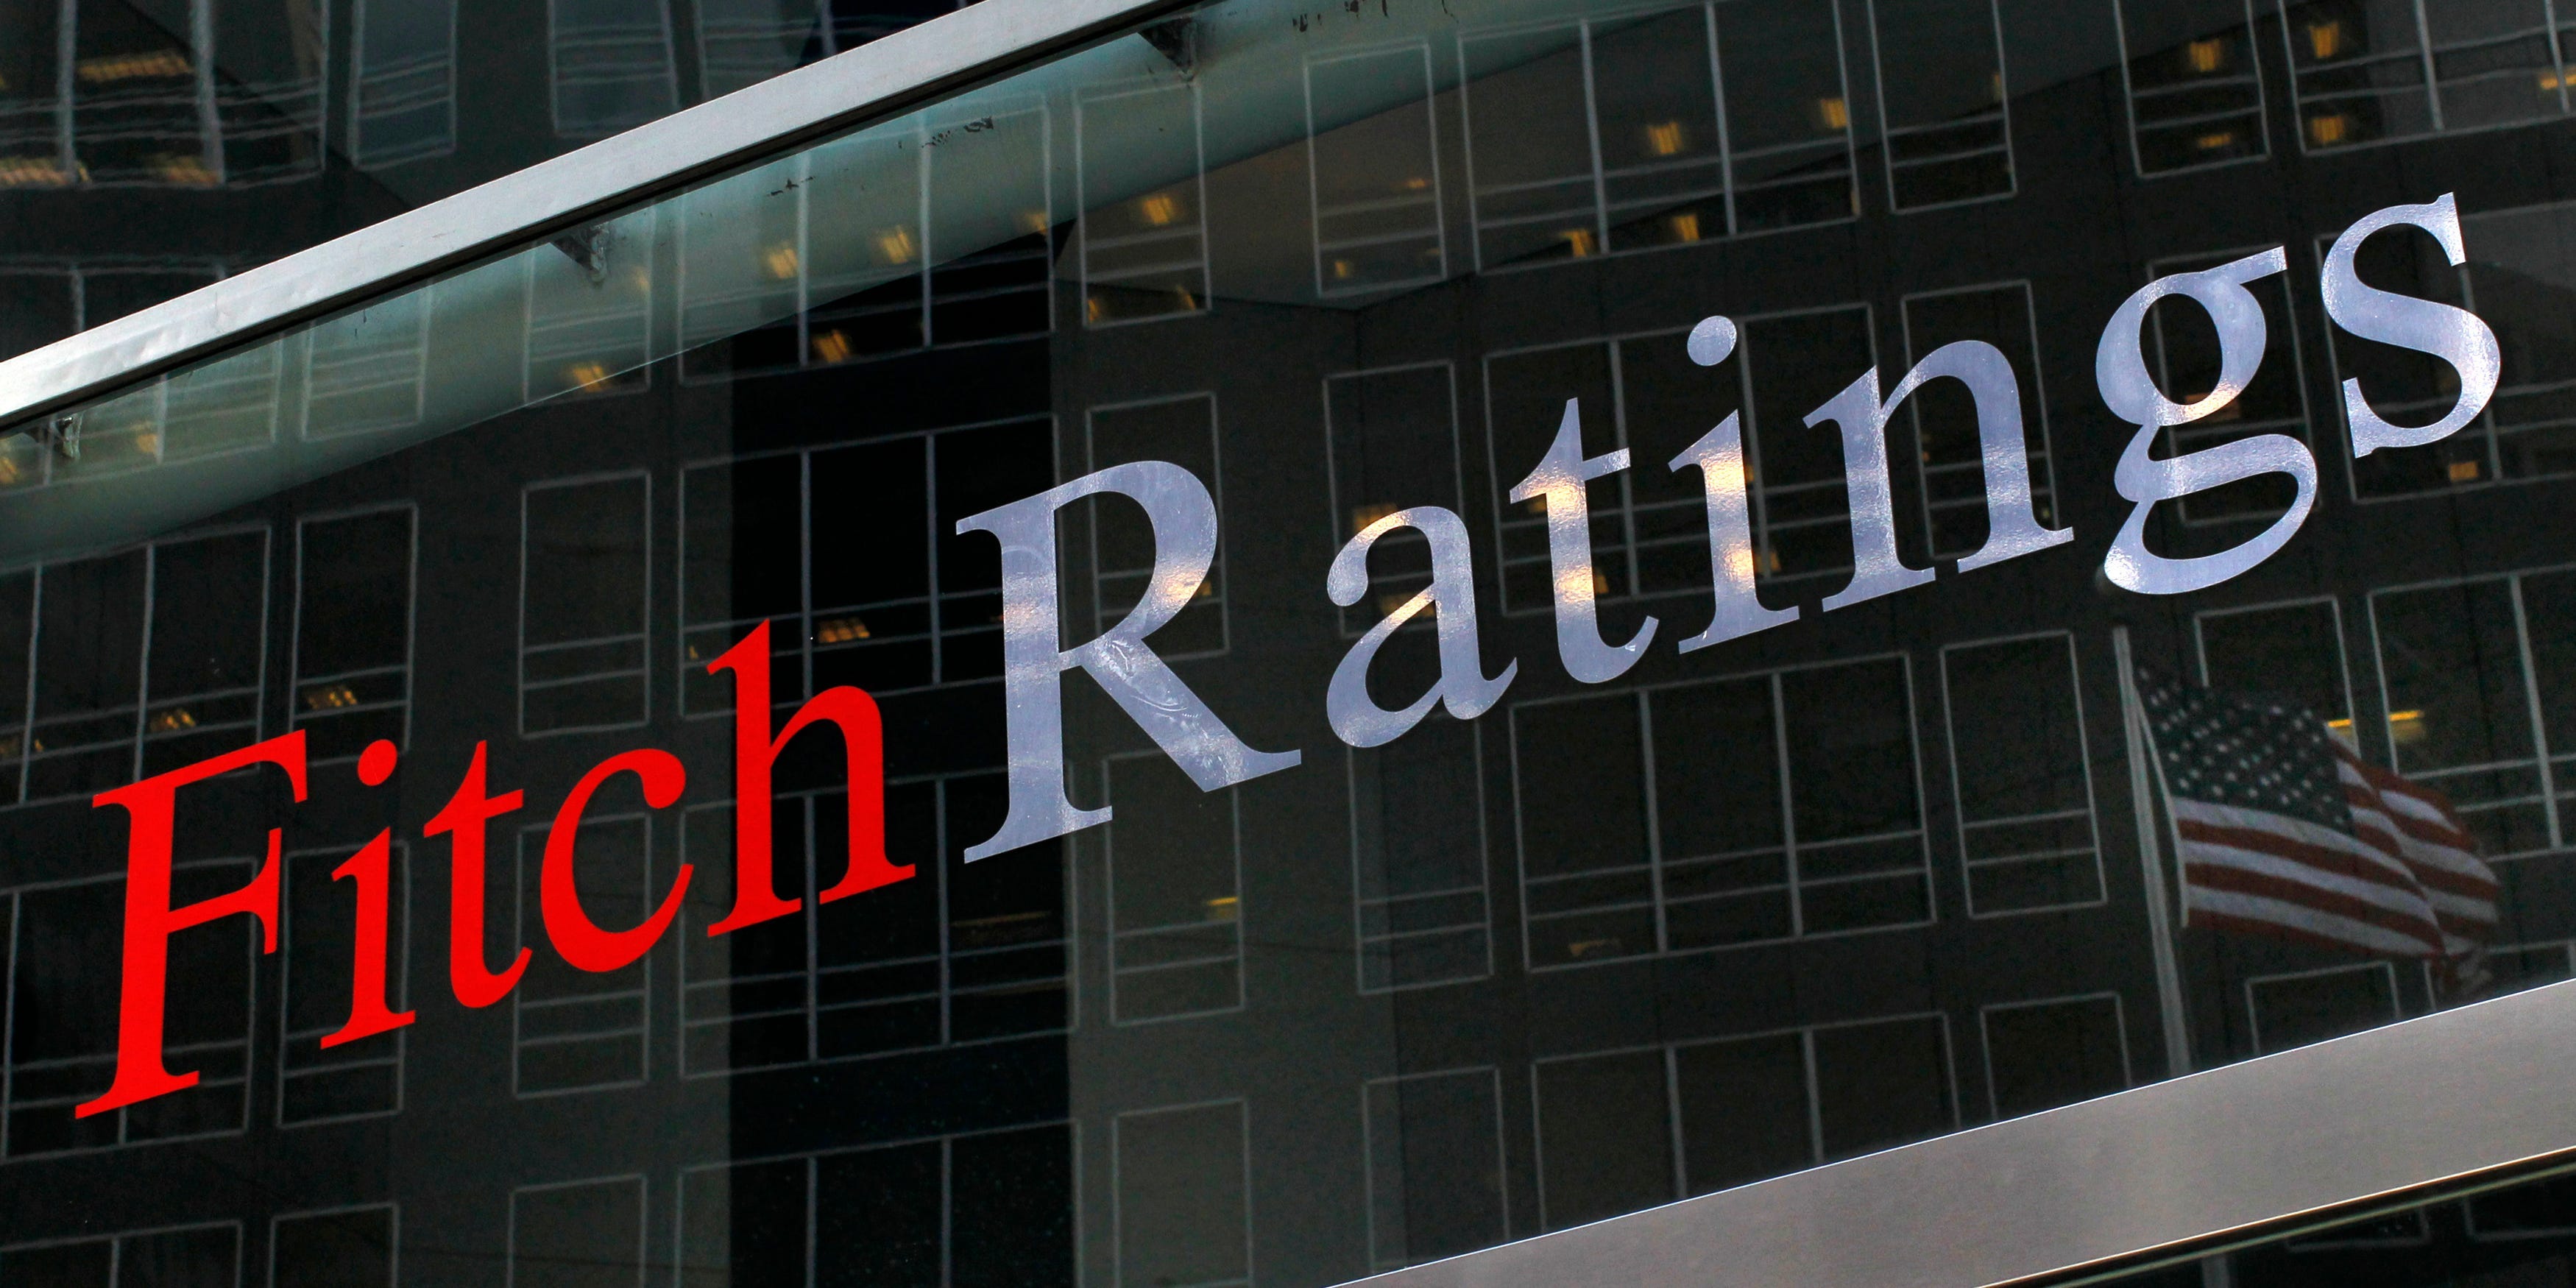 Fitch downgrades Ghana to CCC credit due to deterioration of public finances